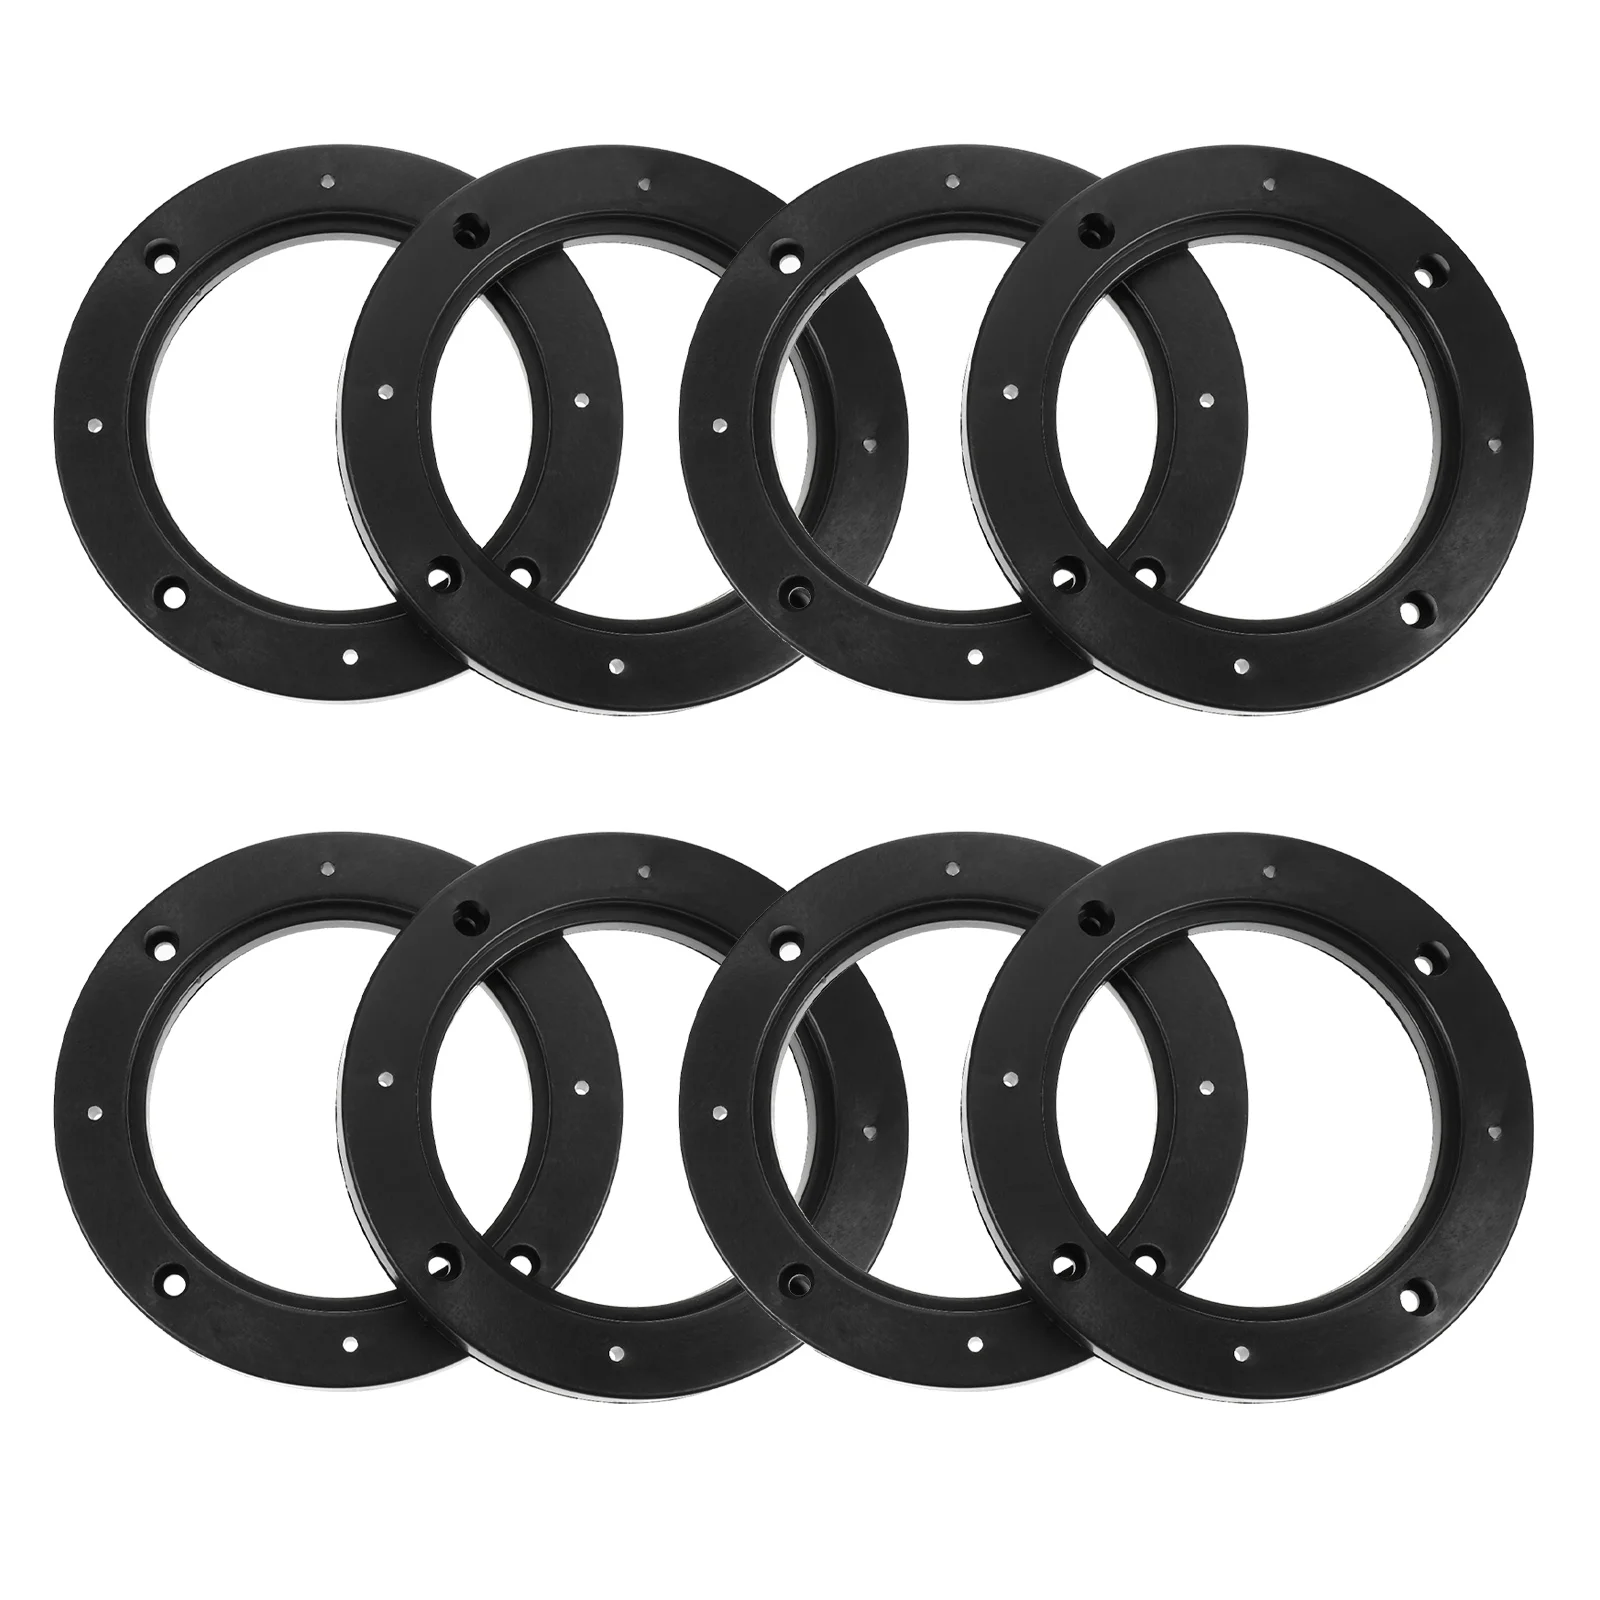 

4 Pairs Plastic Horn Gasket Vehicles Audio Adapter Ring Speaker Mounting Spacer Spacers Car Abs Shims